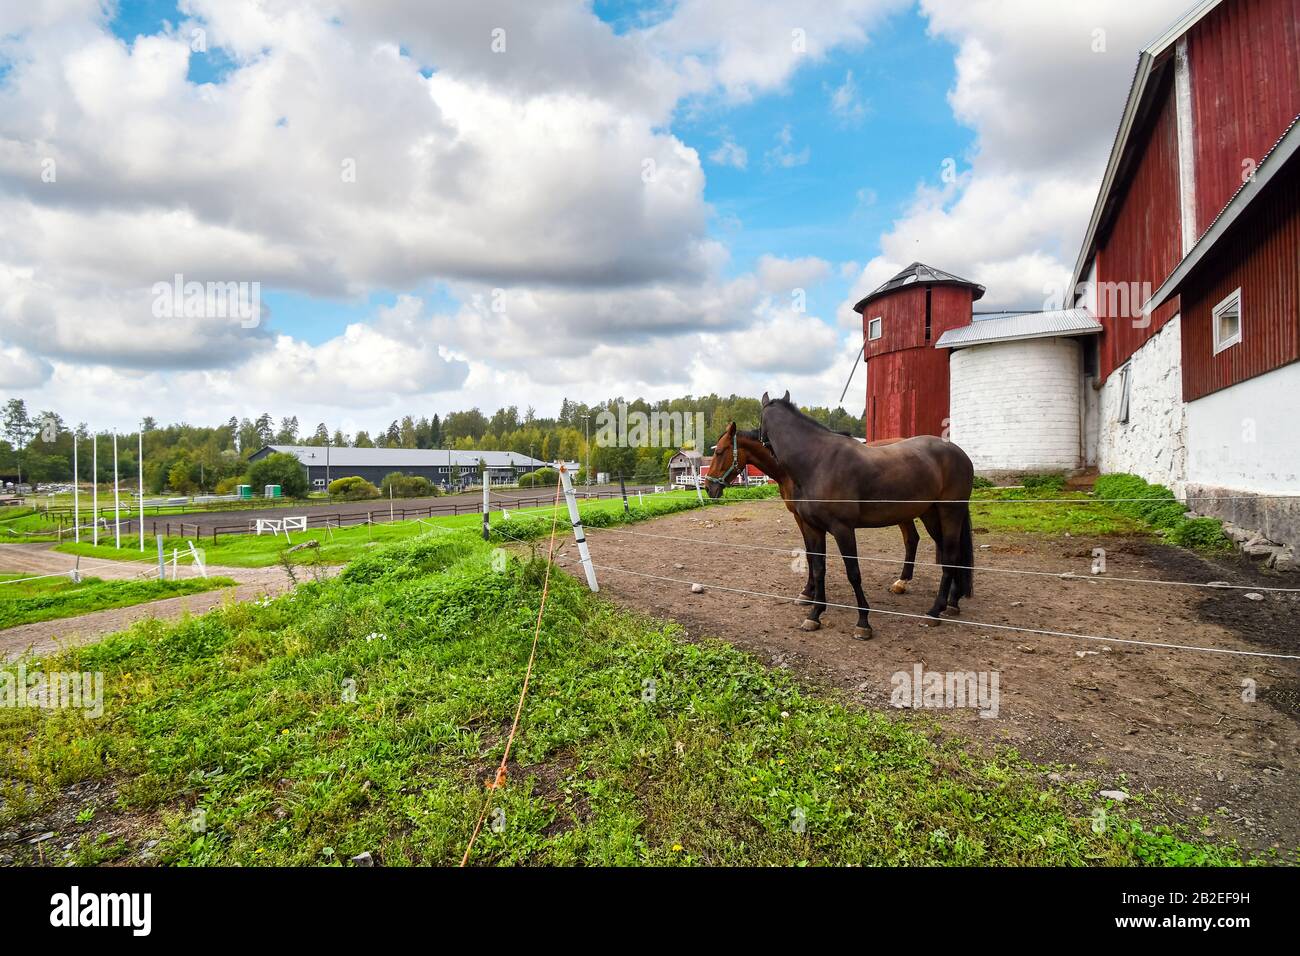 Two thoroughbred horses stand together in a corral at a large horse ranch farm with barn and silo in the rural countryside of Finland. Stock Photo